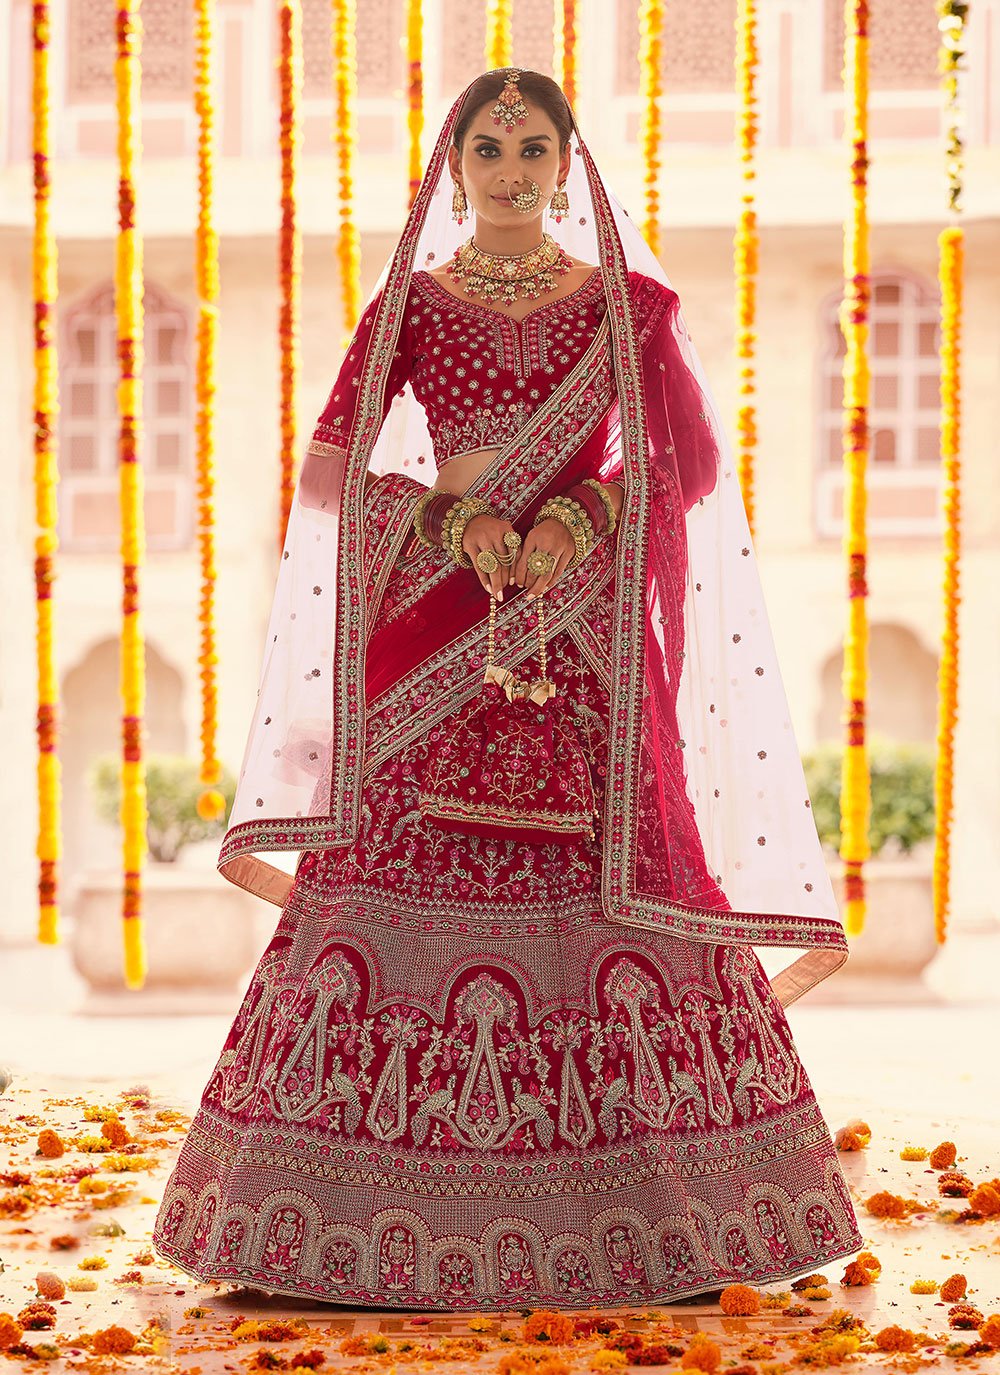 Photo of Girly engagement lehengas for brides to be